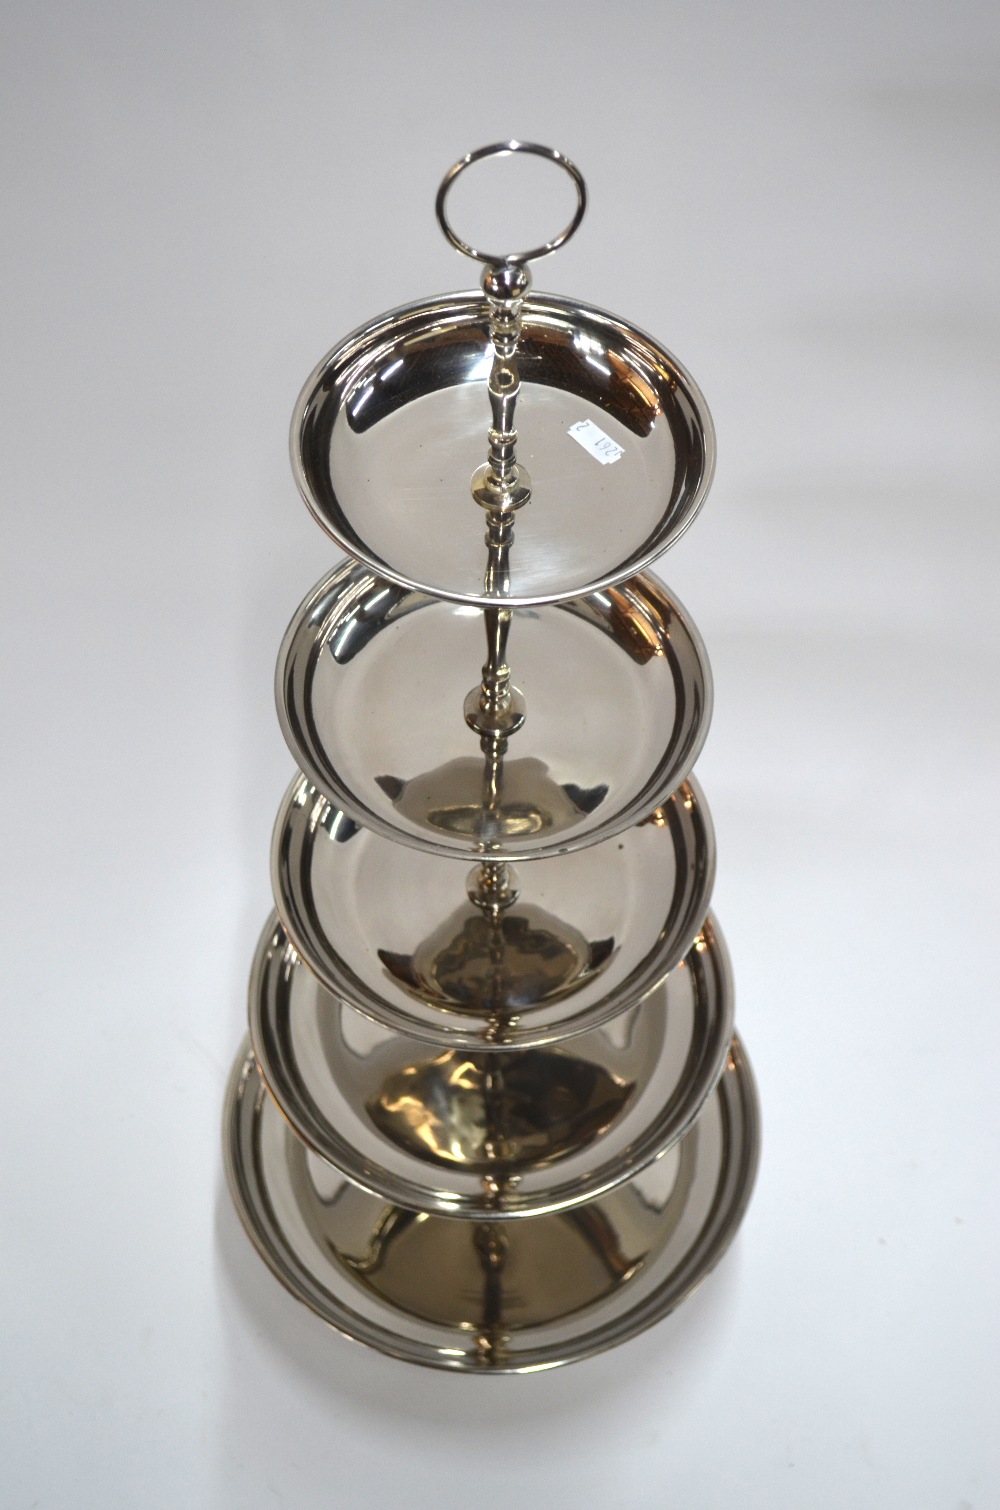 A nickel-plated 5-tier cake stand - Image 3 of 5